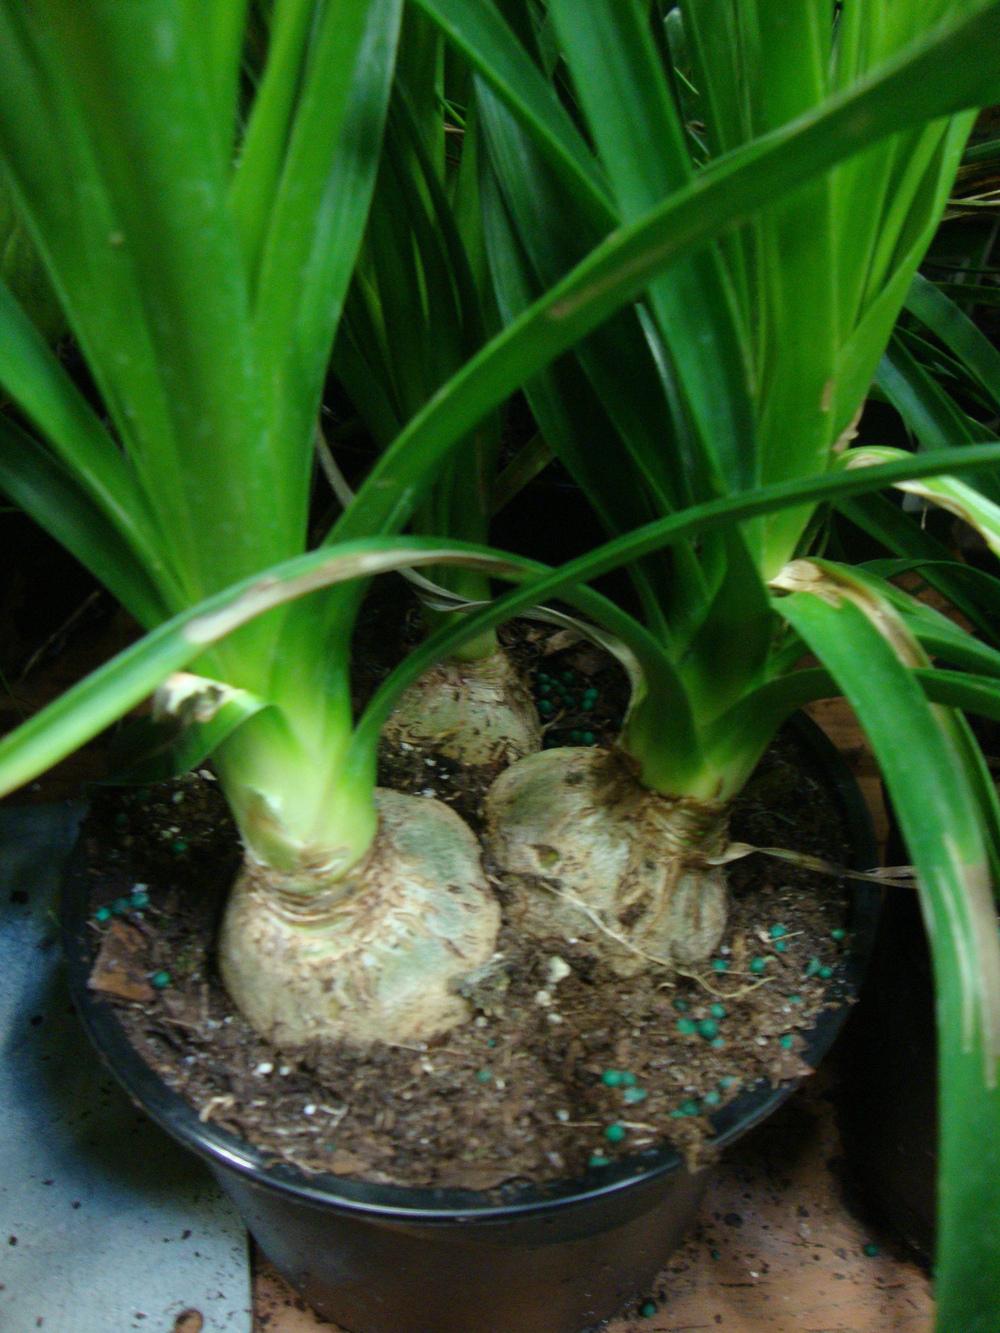 Photo of Ponytail Palm (Beaucarnea recurvata) uploaded by Paul2032